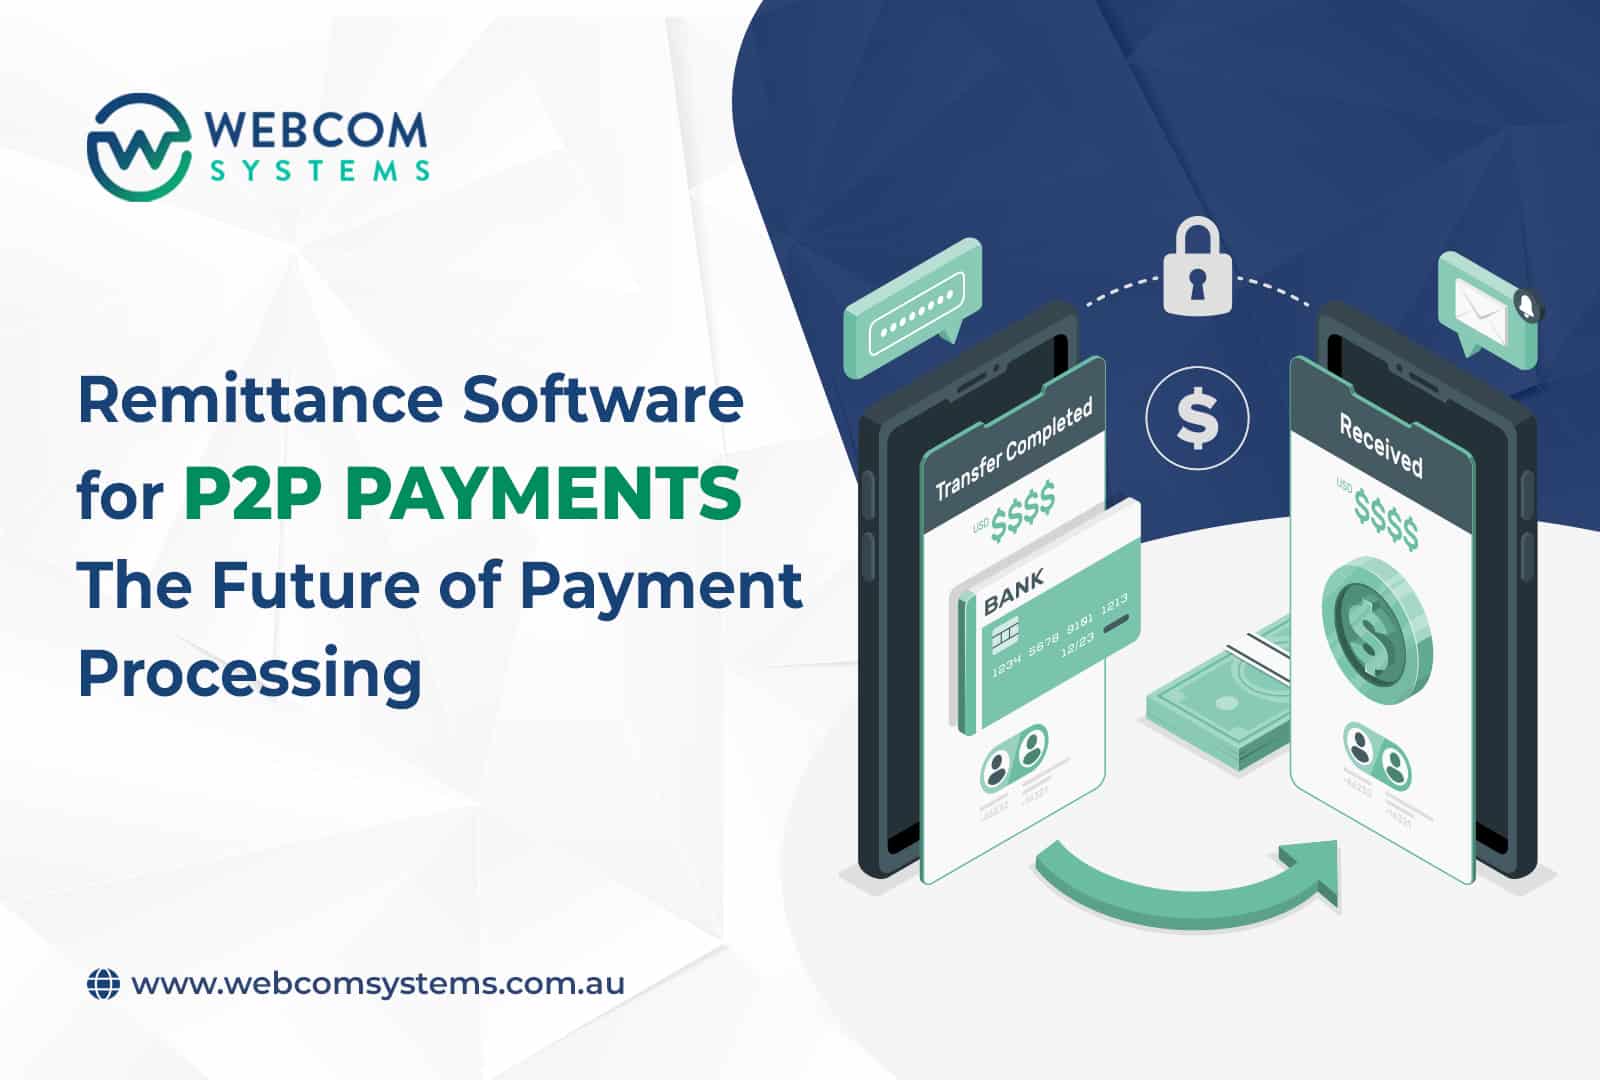 Money Remittance Software for P2P Payments: The Future of Payment Processing